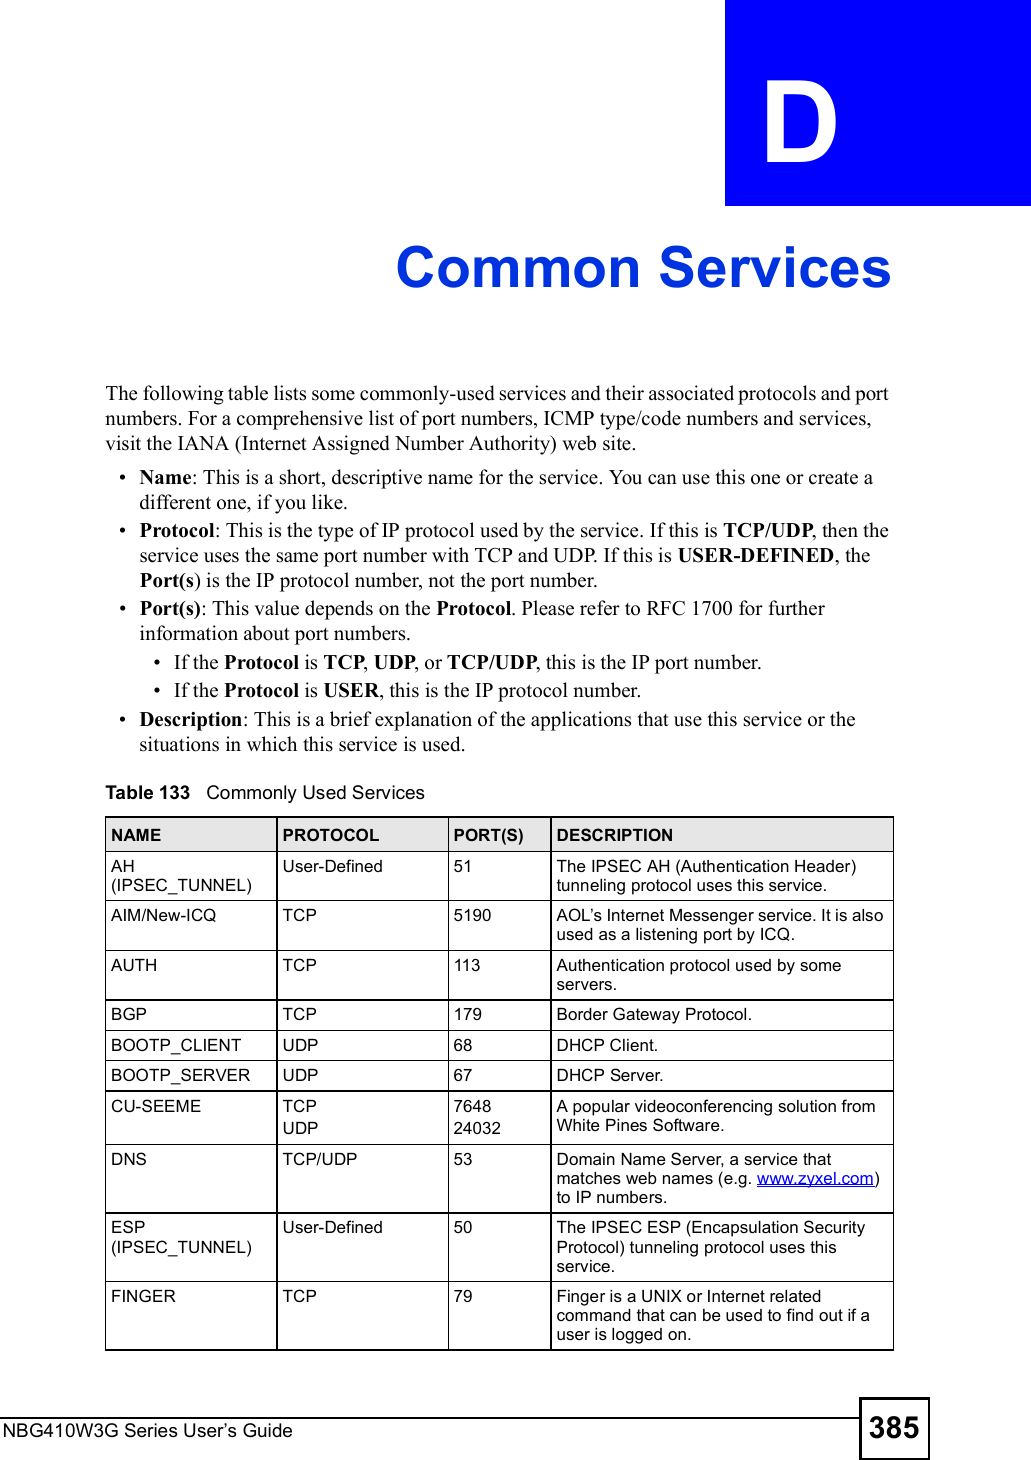 NBG410W3G Series User s Guide 385APPENDIX  D Common ServicesThe following table lists some commonly-used services and their associated protocols and port numbers. For a comprehensive list of port numbers, ICMP type/code numbers and services, visit the IANA (Internet Assigned Number Authority) web site.  Name: This is a short, descriptive name for the service. You can use this one or create a different one, if you like. Protocol: This is the type of IP protocol used by the service. If this is TCP/UDP, then the service uses the same port number with TCP and UDP. If this is USER-DEFINED, the Port(s) is the IP protocol number, not the port number. Port(s): This value depends on the Protocol. Please refer to RFC 1700 for further information about port numbers. If the Protocol is TCP, UDP, or TCP/UDP, this is the IP port number. If the Protocol is USER, this is the IP protocol number. Description: This is a brief explanation of the applications that use this service or the situations in which this service is used.Table 133   Commonly Used ServicesNAME PROTOCOL PORT(S) DESCRIPTIONAH (IPSEC_TUNNEL)User-Defined 51 The IPSEC AH (Authentication Header) tunneling protocol uses this service.AIM/New-ICQ TCP 5190 AOL s Internet Messenger service. It is also used as a listening port by ICQ.AUTH TCP 113 Authentication protocol used by some servers.BGP TCP 179 Border Gateway Protocol.BOOTP_CLIENT UDP 68 DHCP Client.BOOTP_SERVER UDP 67 DHCP Server.CU-SEEME TCPUDP764824032A popular videoconferencing solution from White Pines Software.DNS TCP/UDP 53 Domain Name Server, a service that matches web names (e.g. www.zyxel.com) to IP numbers.ESP (IPSEC_TUNNEL)User-Defined 50 The IPSEC ESP (Encapsulation Security Protocol) tunneling protocol uses this service.FINGER TCP 79 Finger is a UNIX or Internet related command that can be used to find out if a user is logged on.